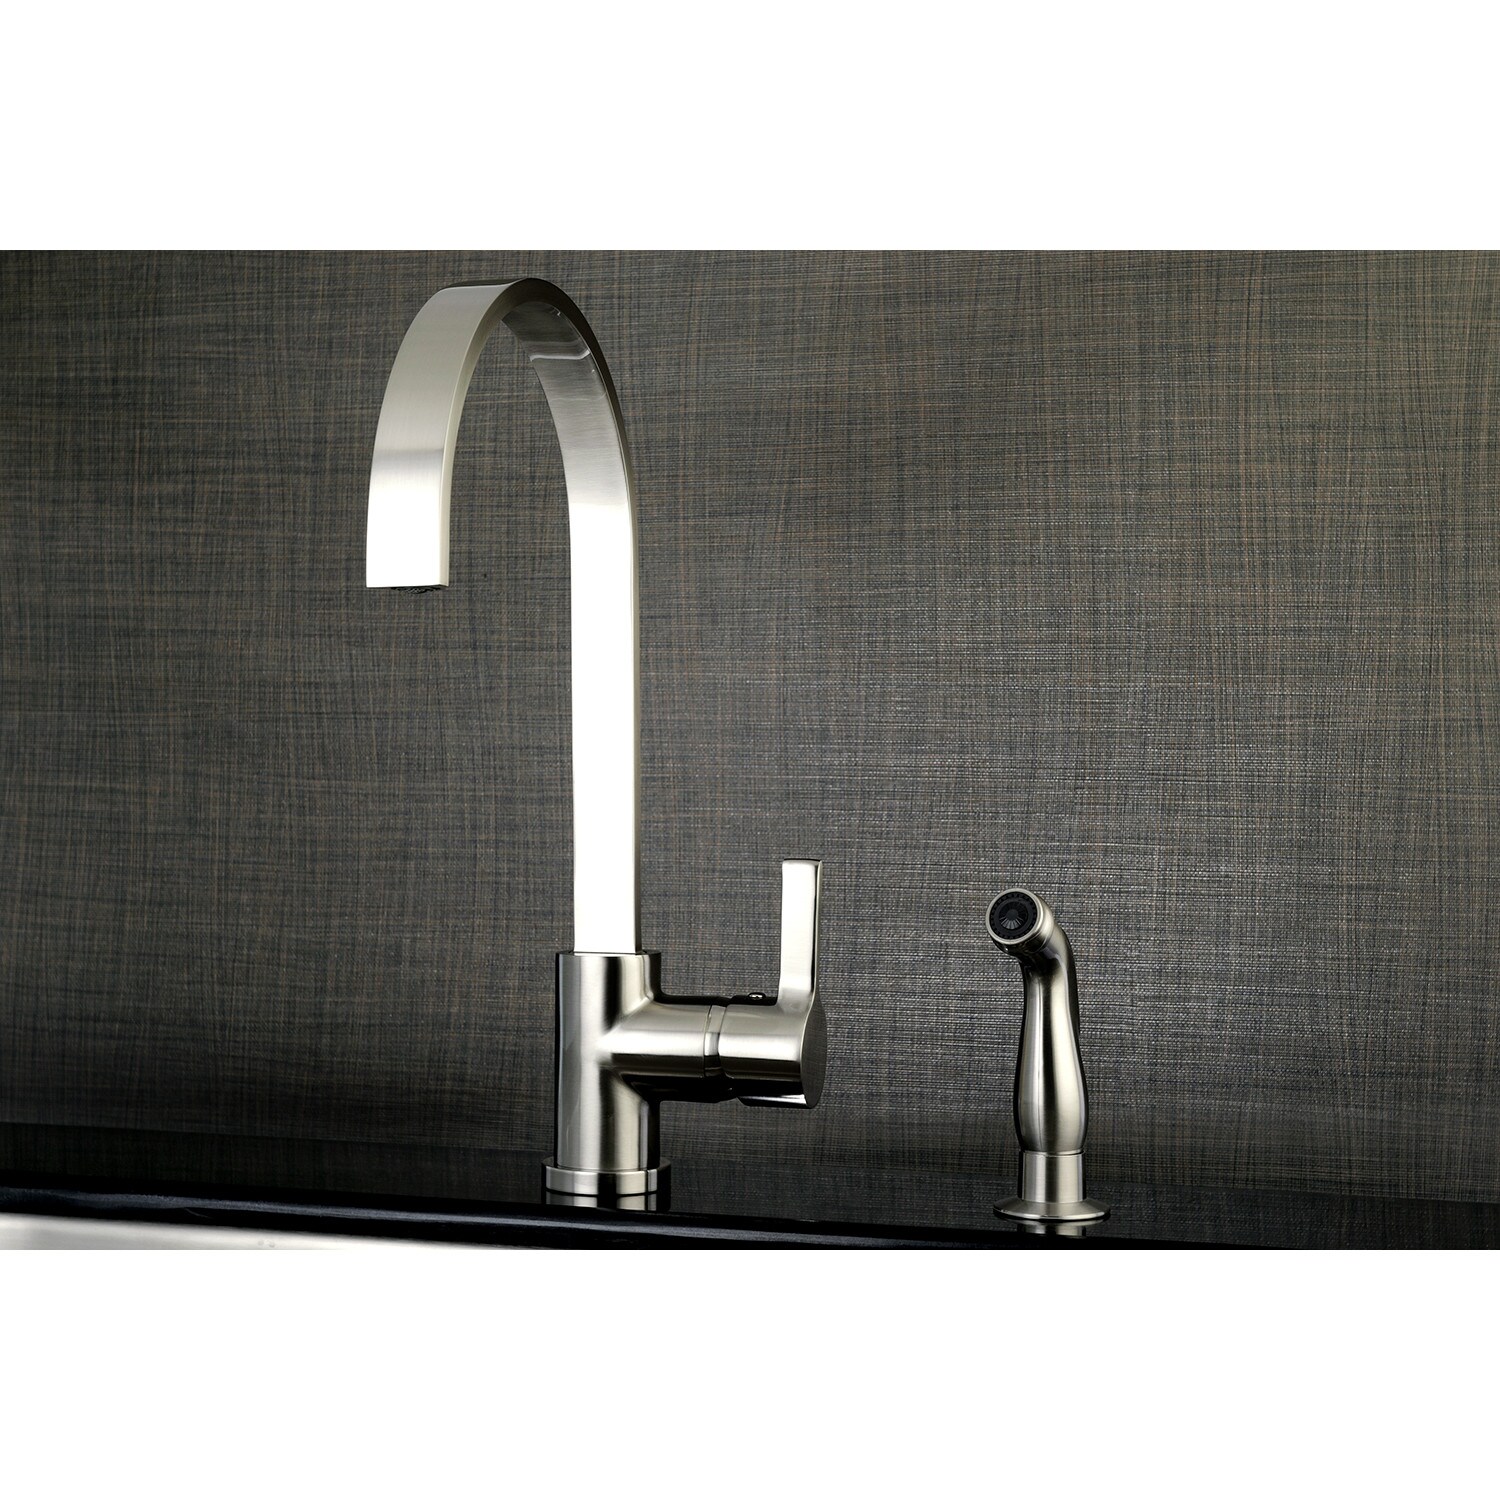 Kingston Brass Continental Brushed Nickel Single Handle High-arc Kitchen Faucet with Sprayer Function (Deck Plate Included)